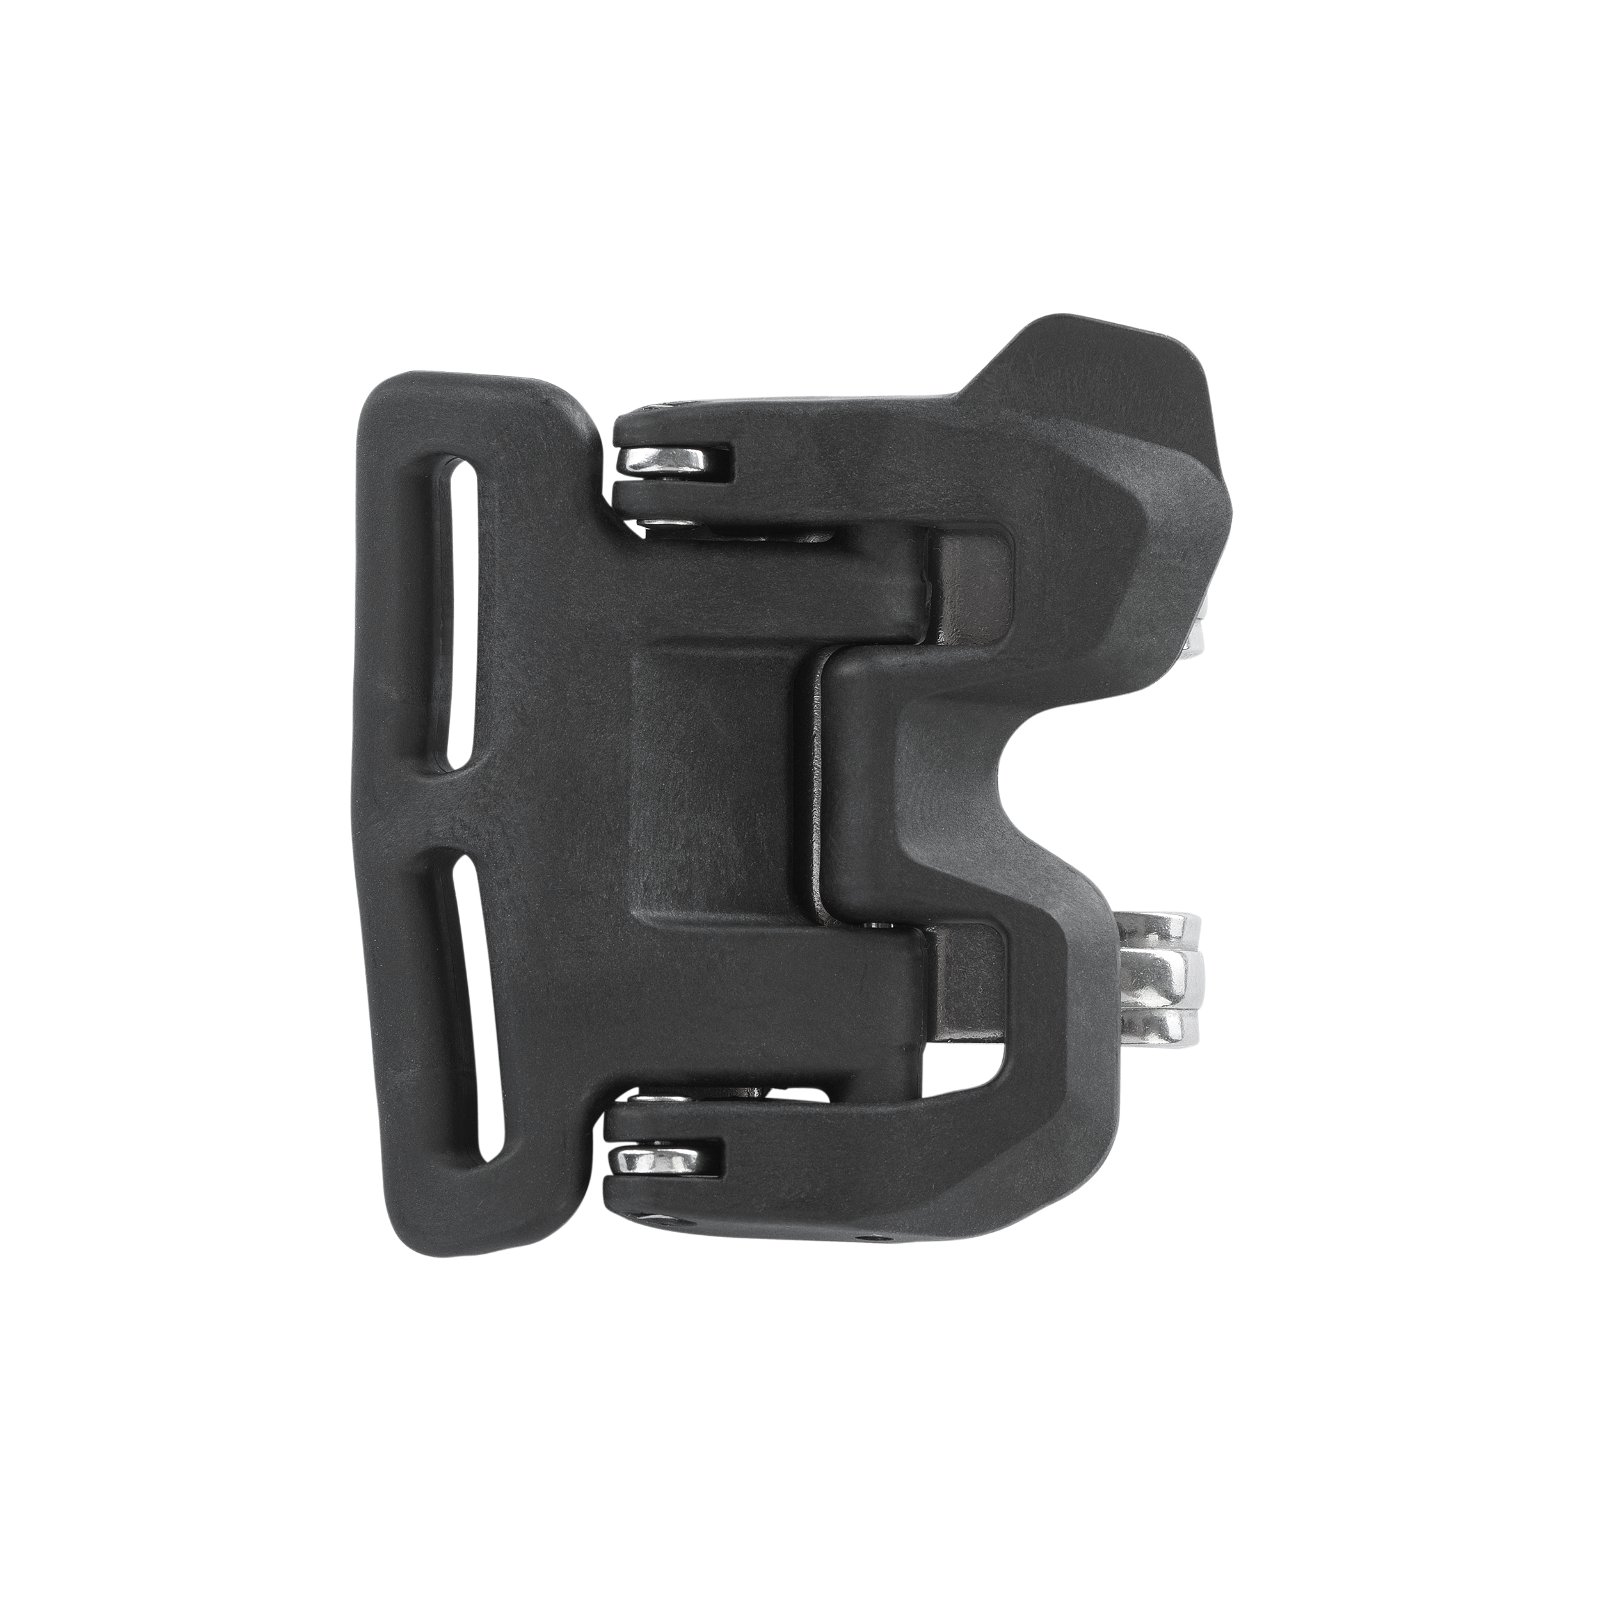 ION Replacement Releasebuckle VIII C-Bar/Spectre Bar 2024-ION Water-OneSize-Black-48220-8039-9010583131788-Surf-store.com